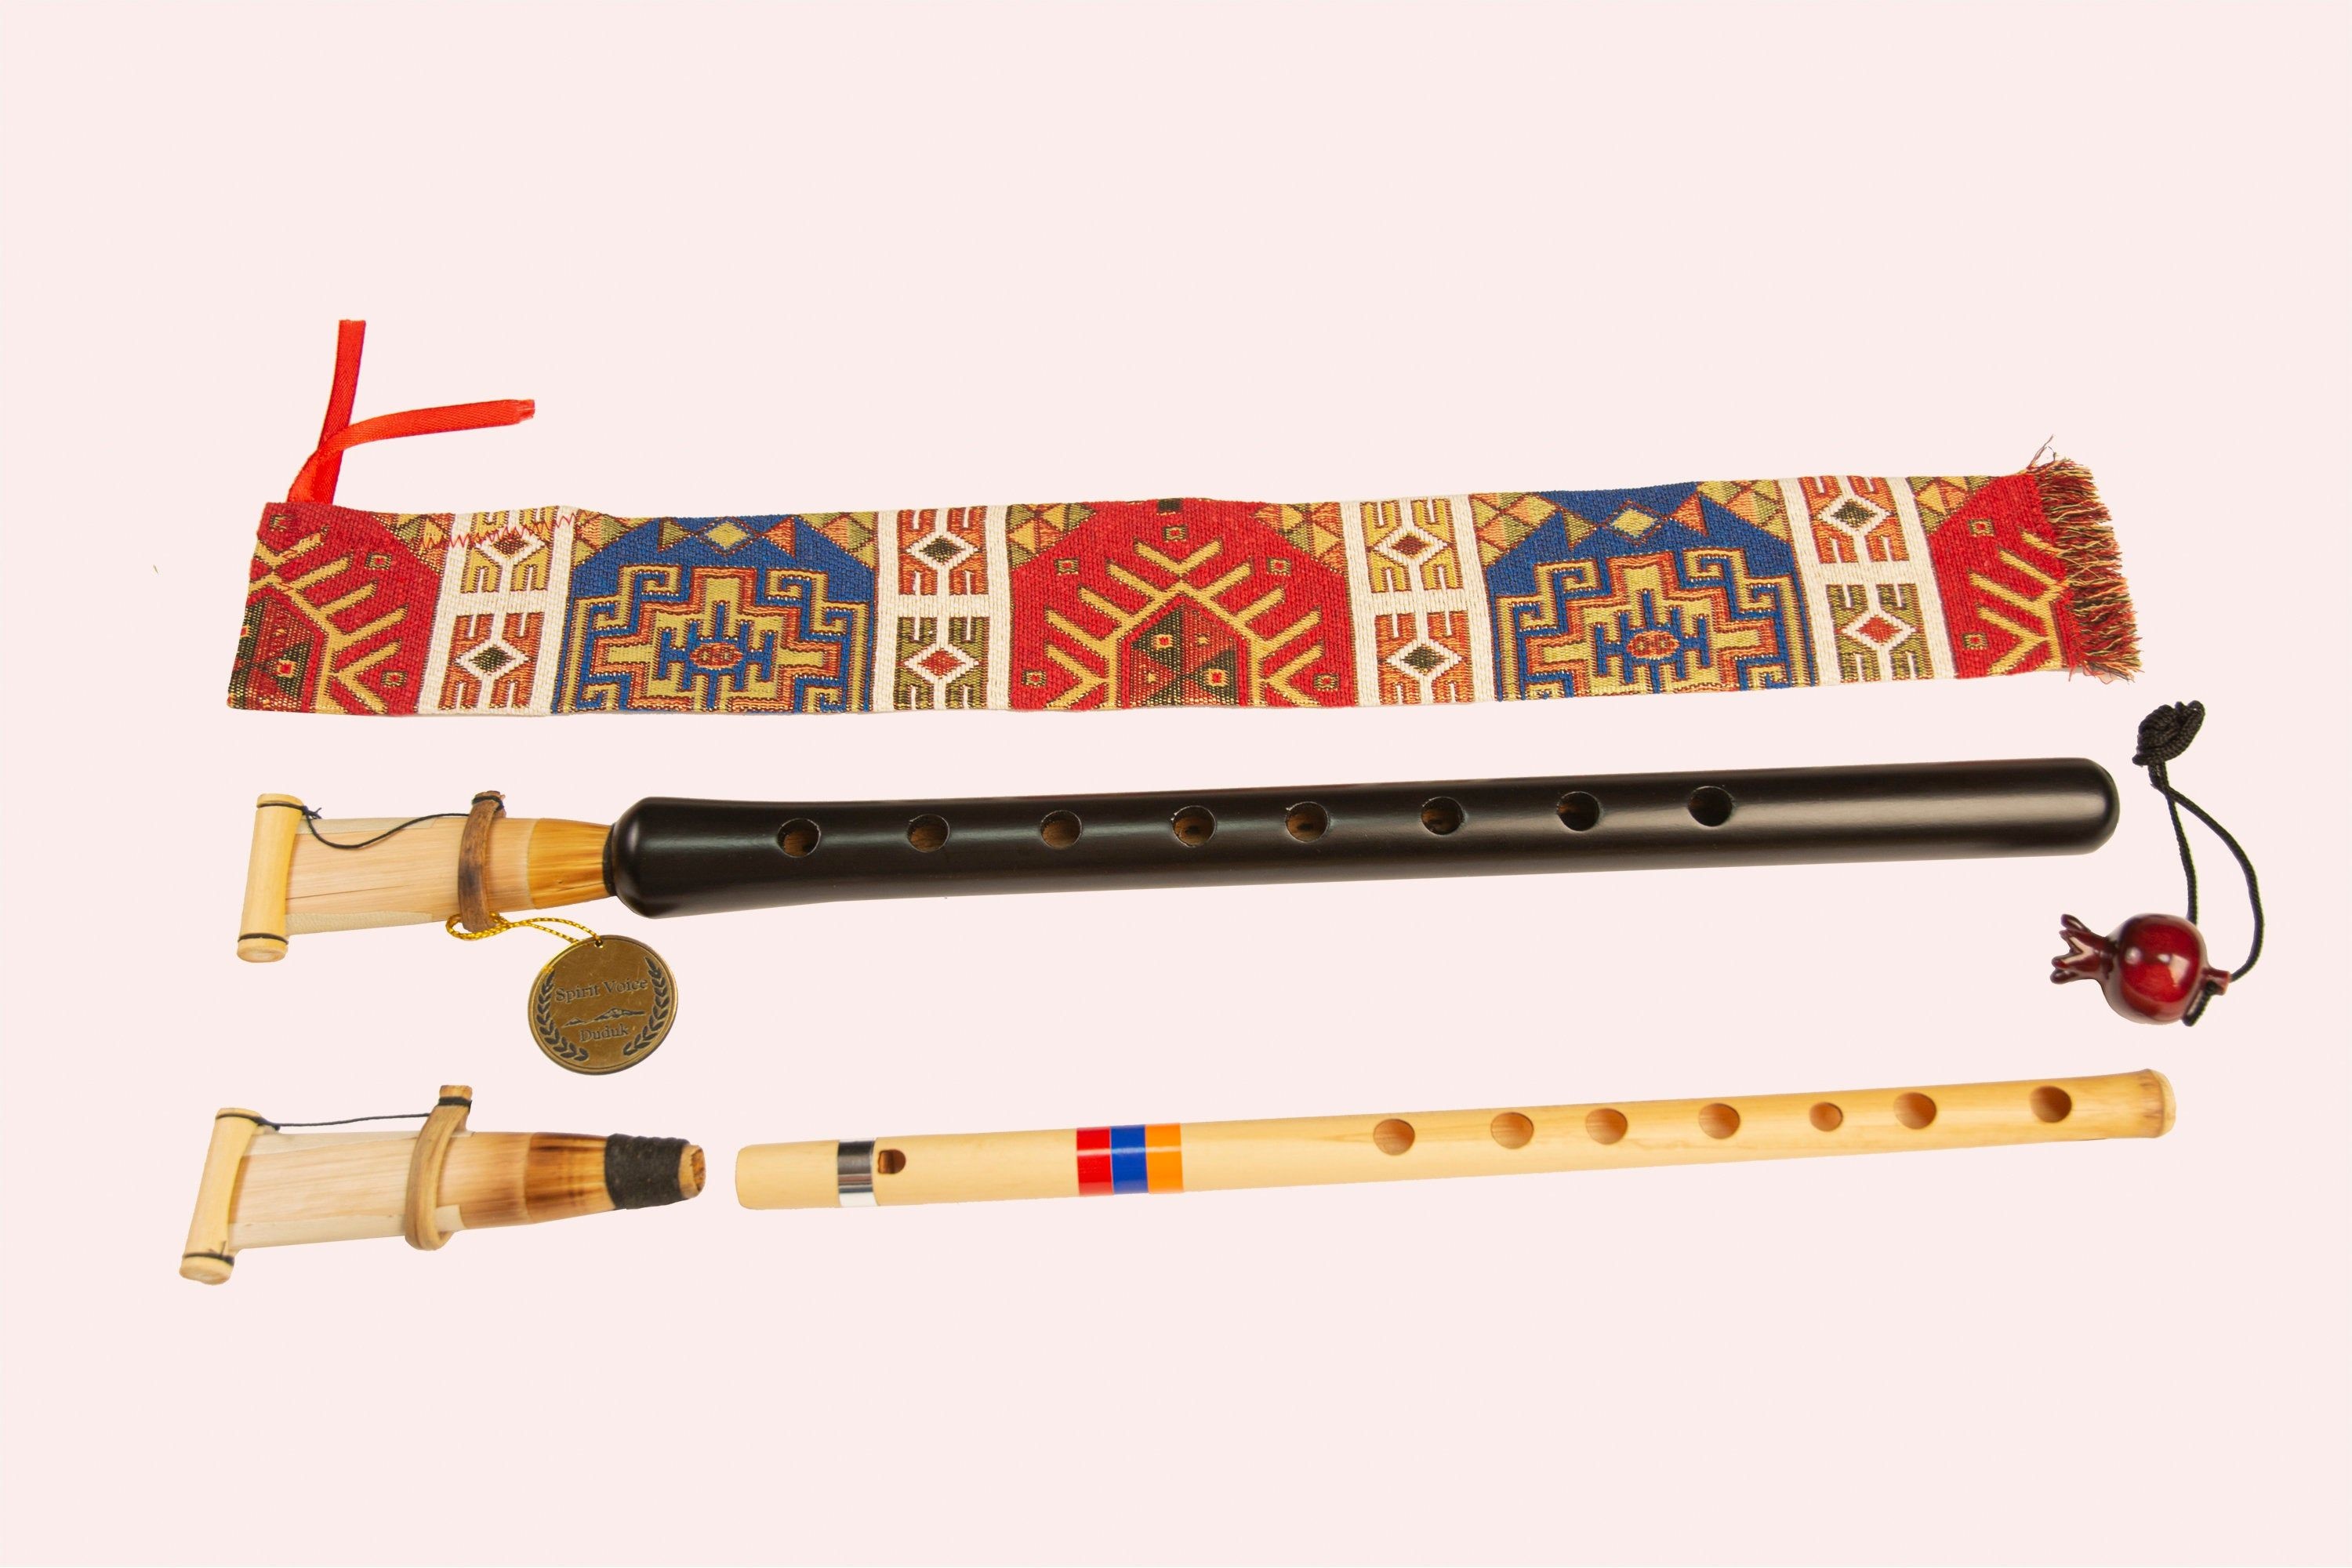 Duduk: Handmade Armenian musical instruments made of apricot wood, 2 reeds, National ornamented case. 3000x2000 HD Wallpaper.